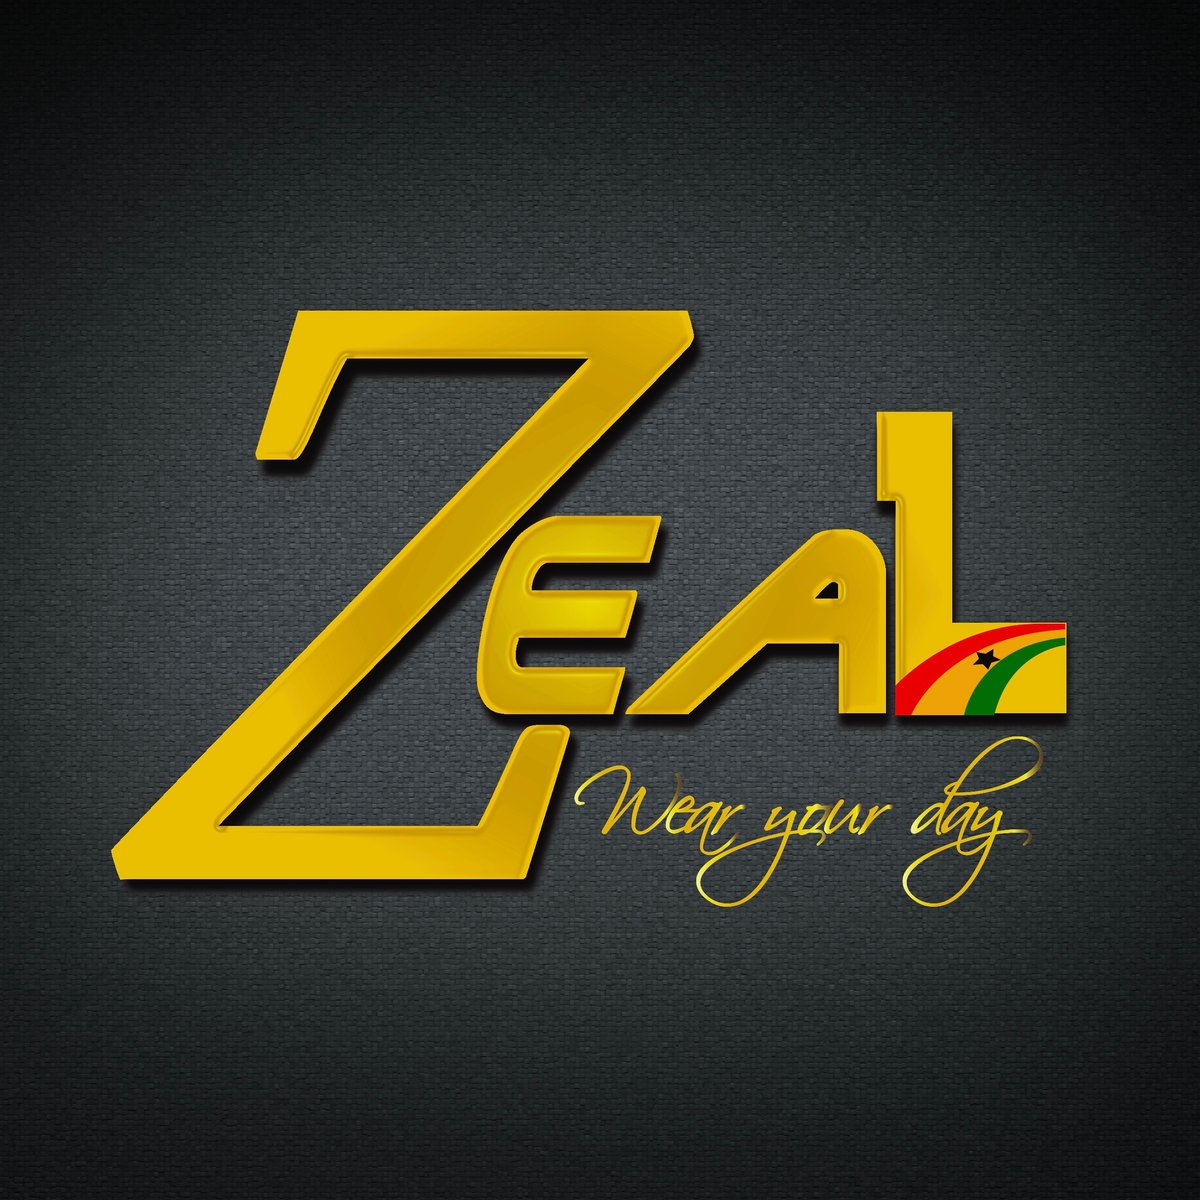 Image of ZEAL WEAR YOUR DAY NECKLACE - AKOSUA (SUNDAY)